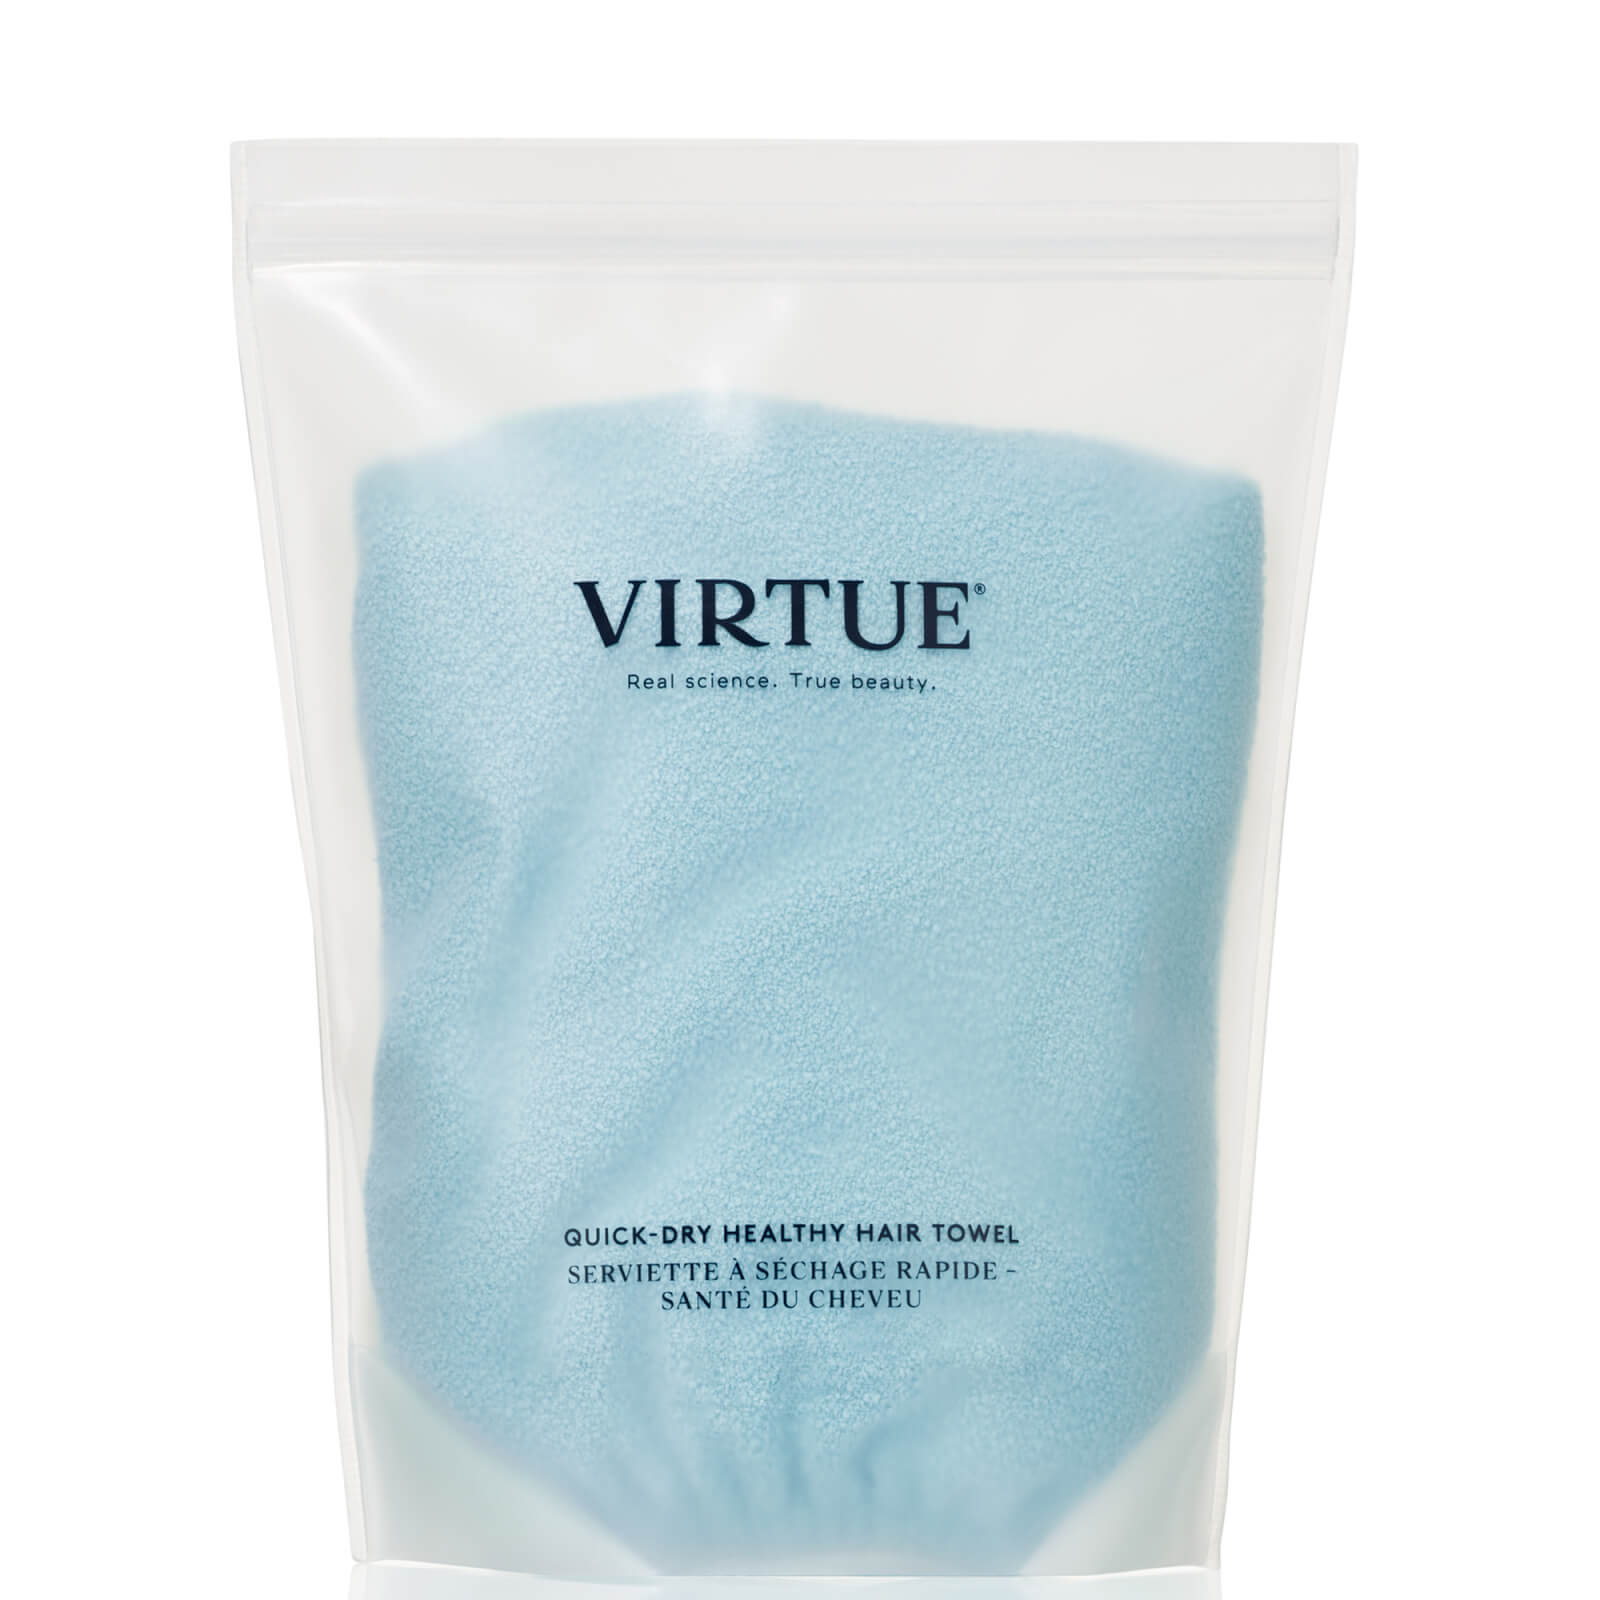 Virtue Quick-dry Healthy Hair Towel In Blue